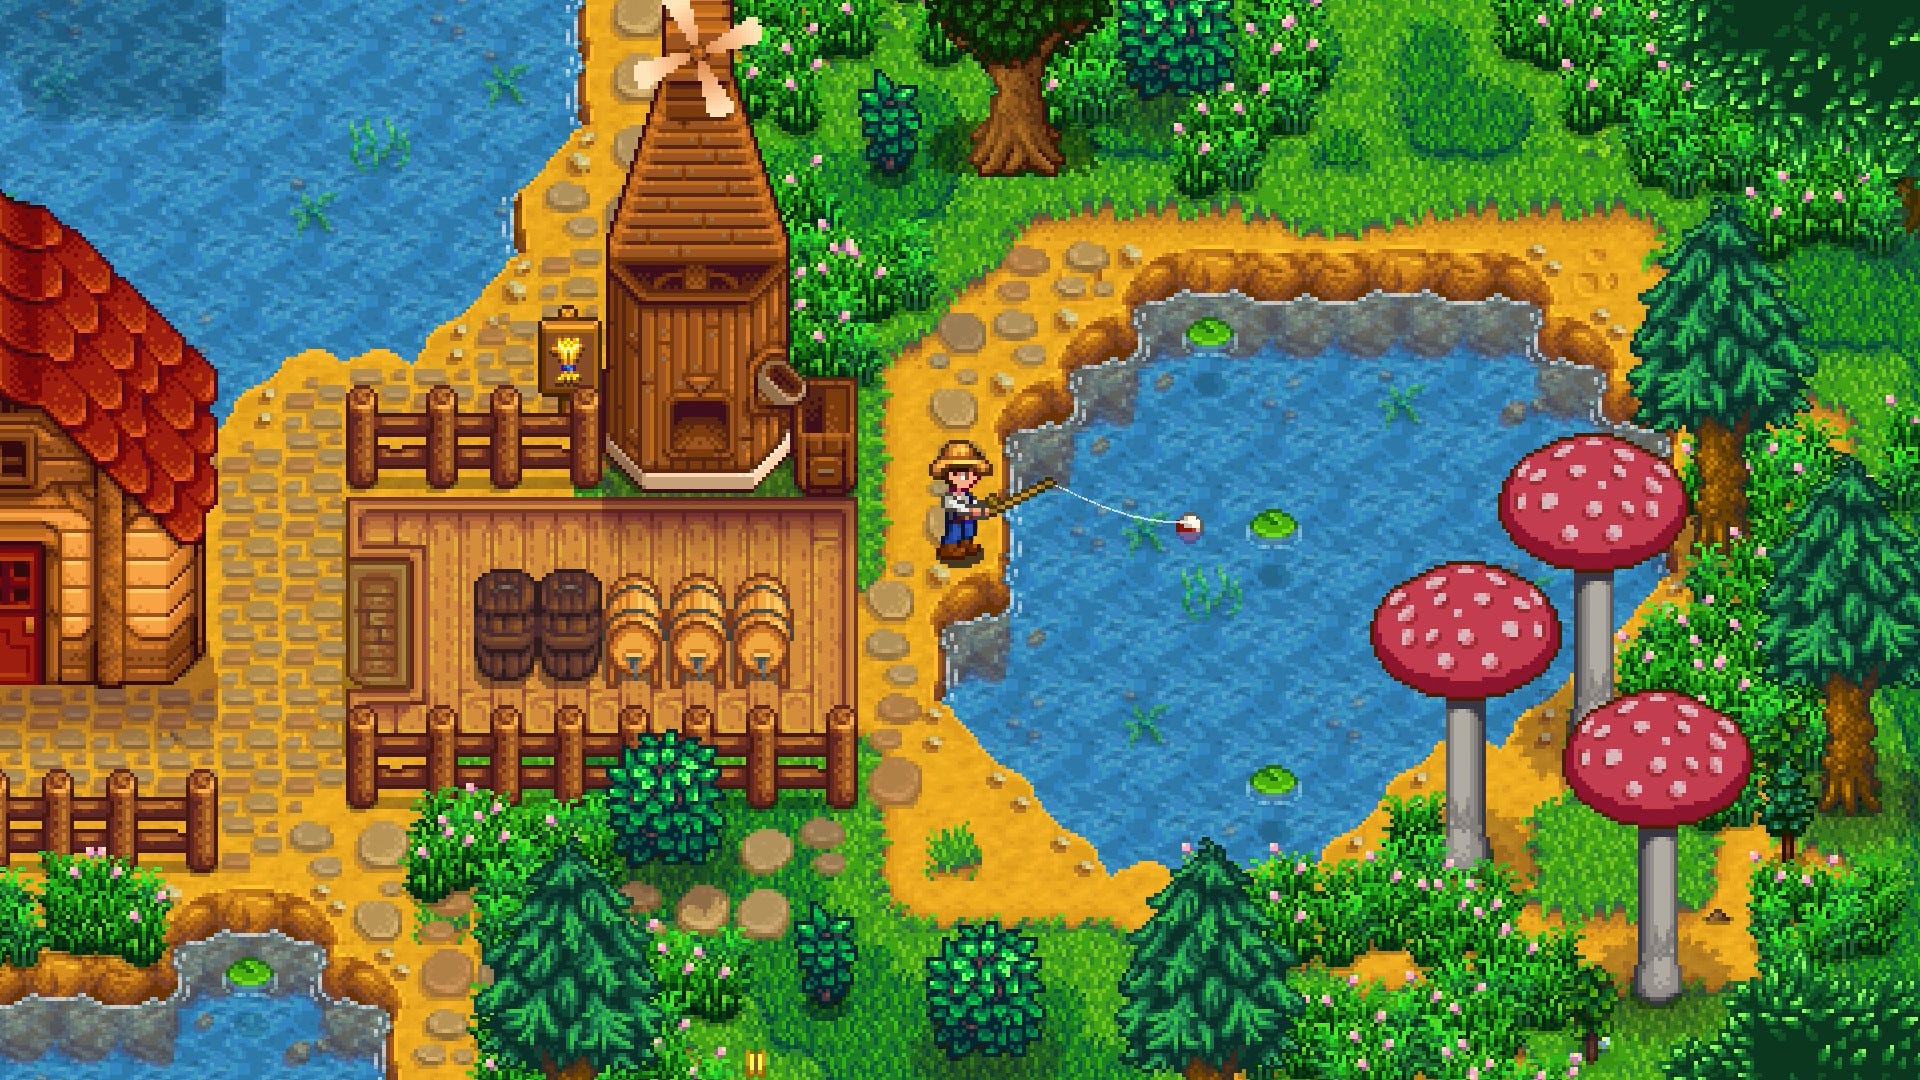 Stardew Valley creator casually flings 40 new mine layouts into latest patch